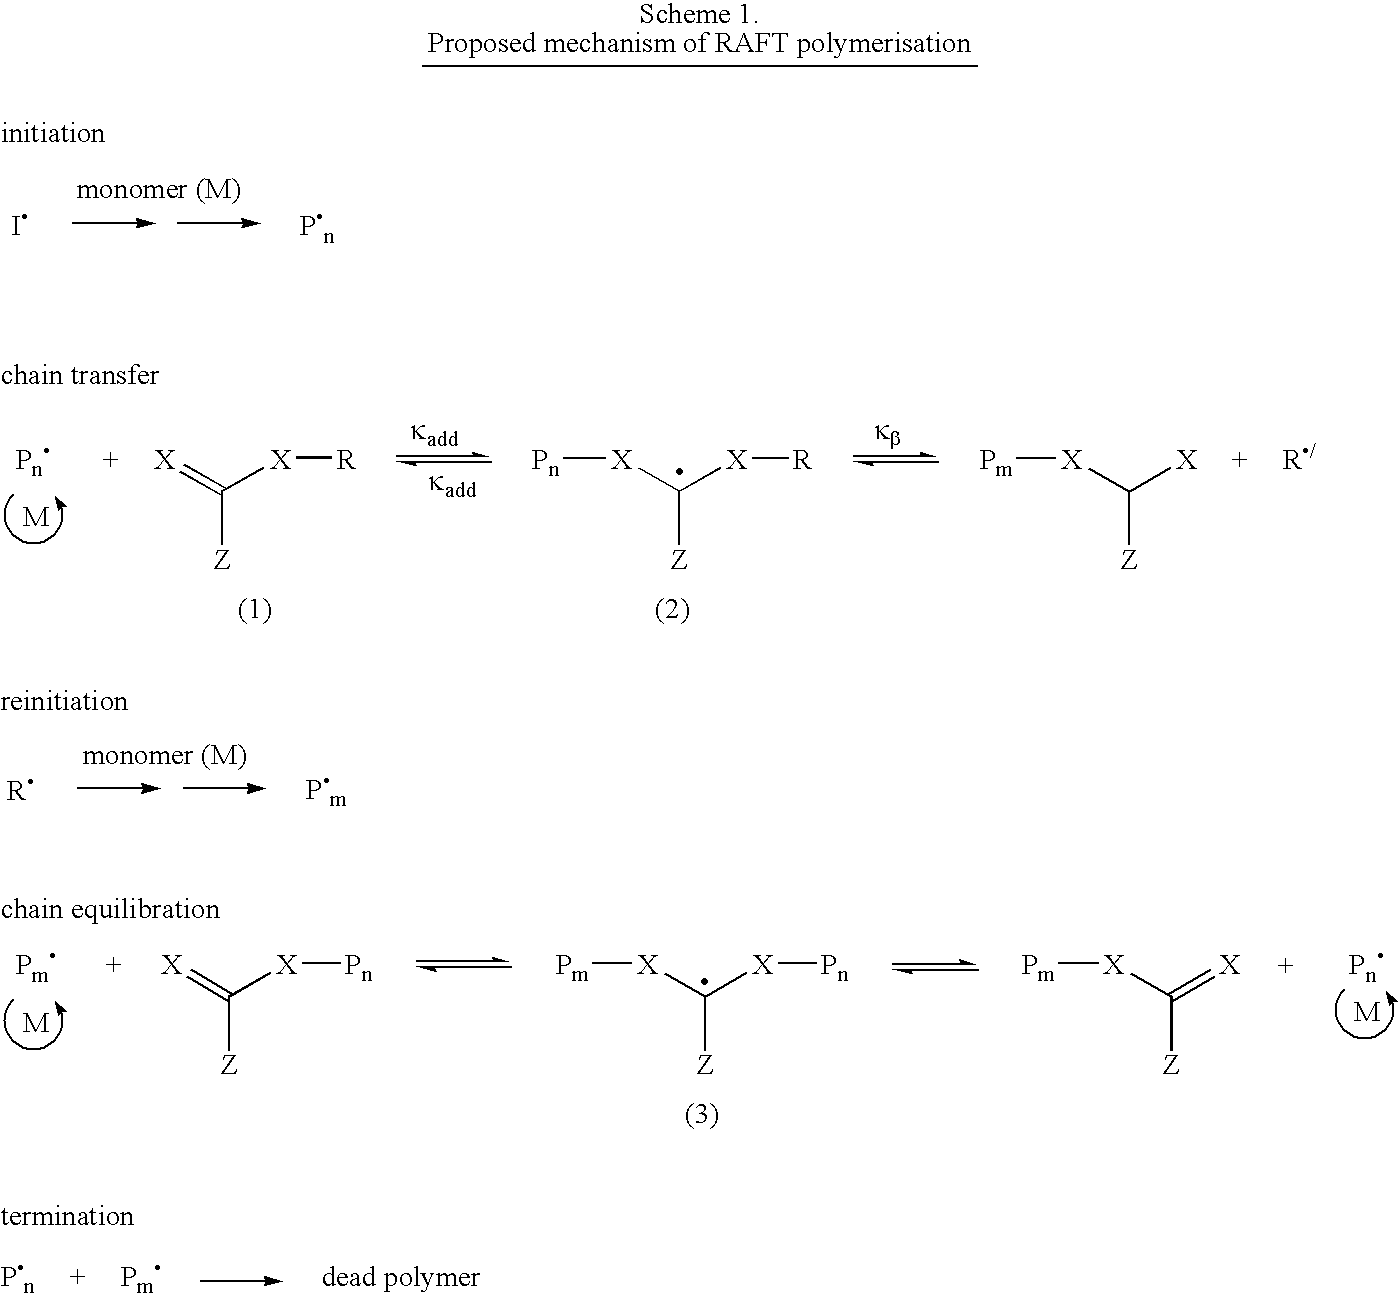 Aqueous dispersions of polymer particles